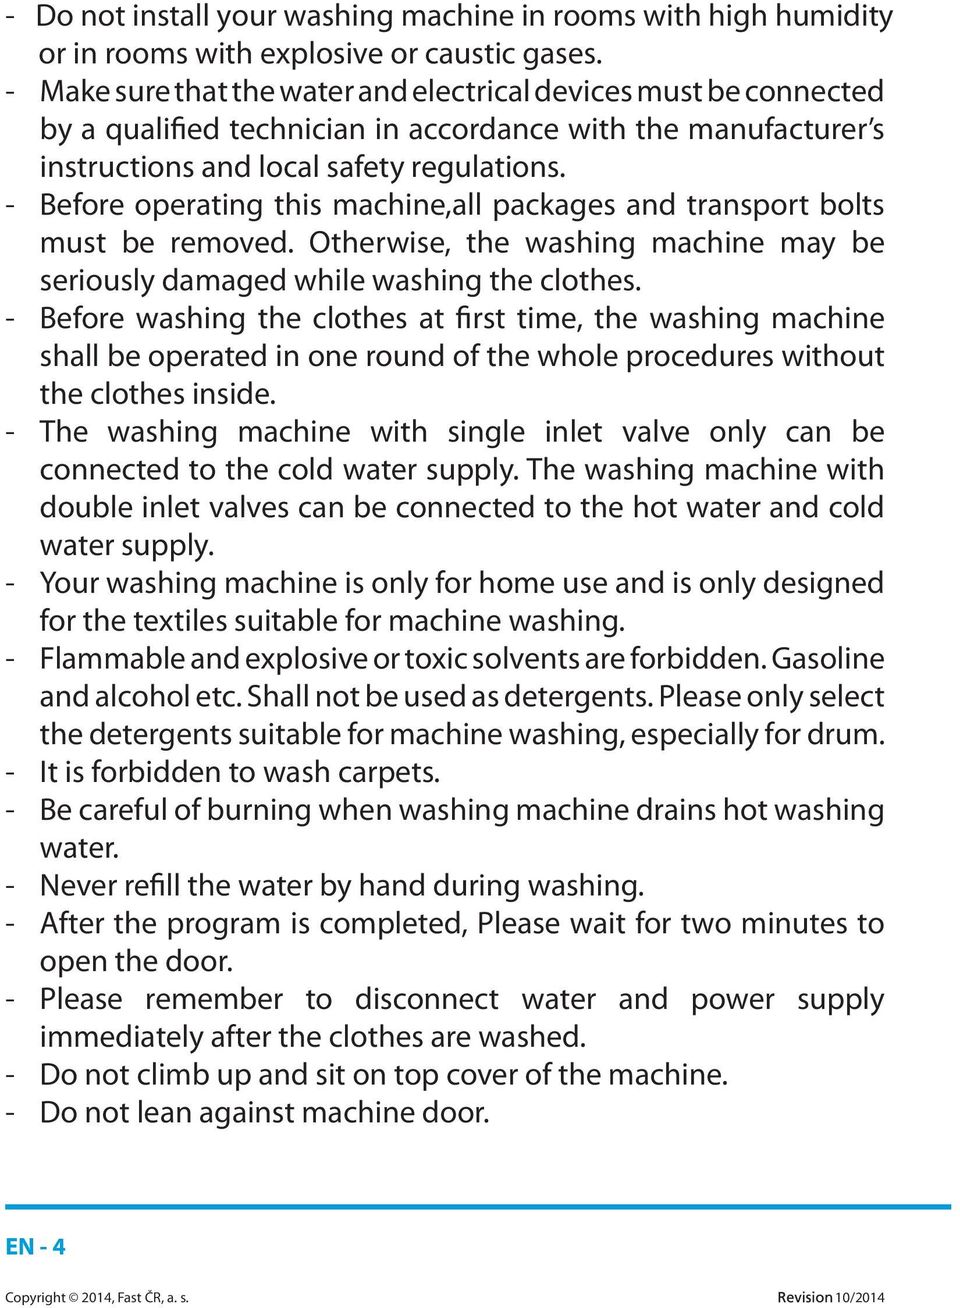 - Before operating this machine,all packages and transport bolts must be removed. Otherwise, the washing machine may be seriously damaged while washing the clothes.